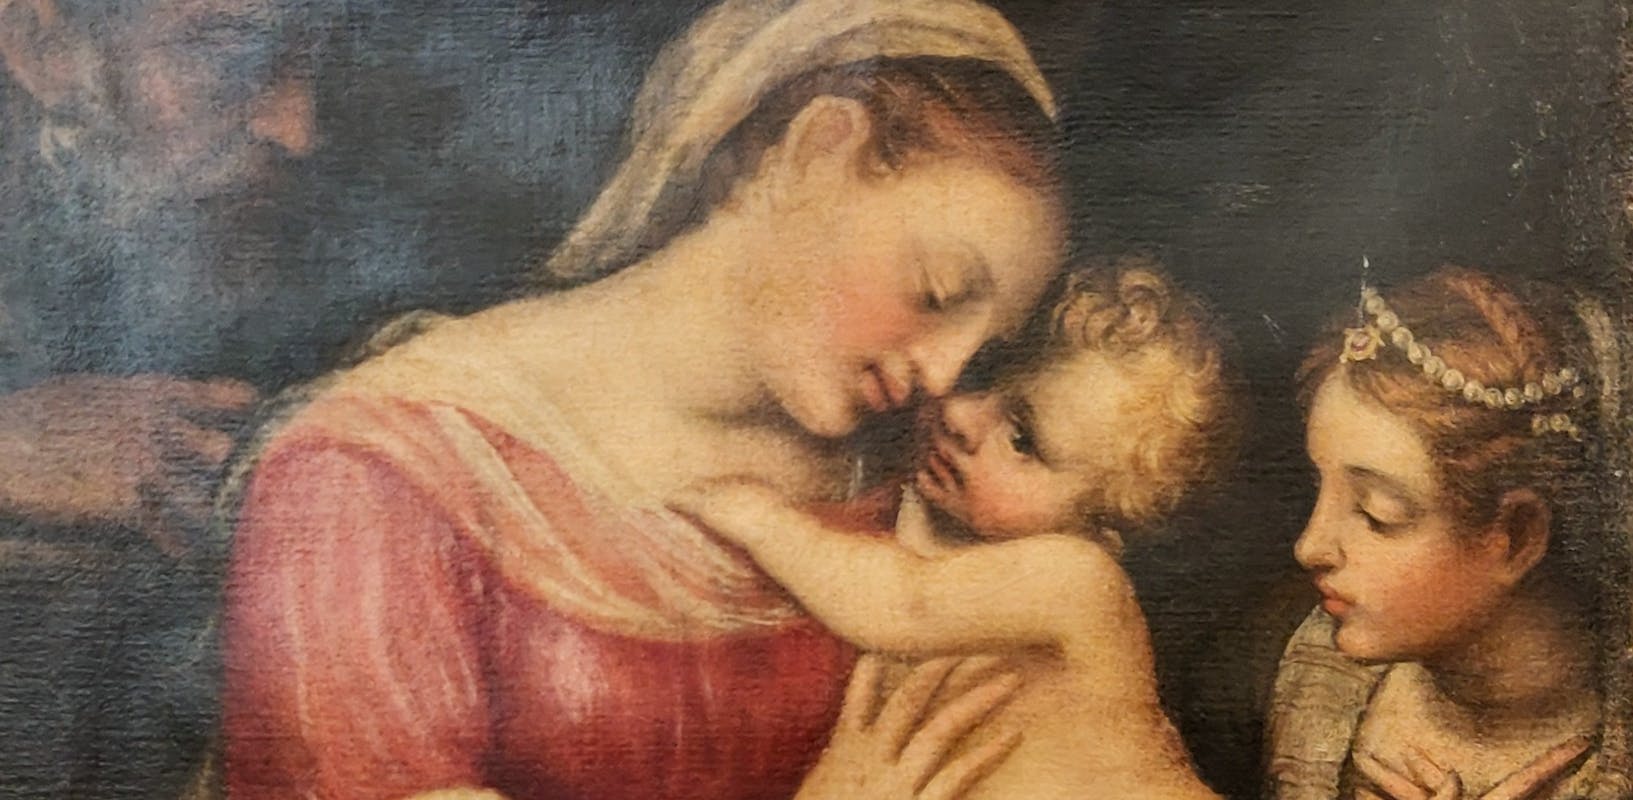 Back at the Uffizi a 16th cent. Holy Family stolen in 1985